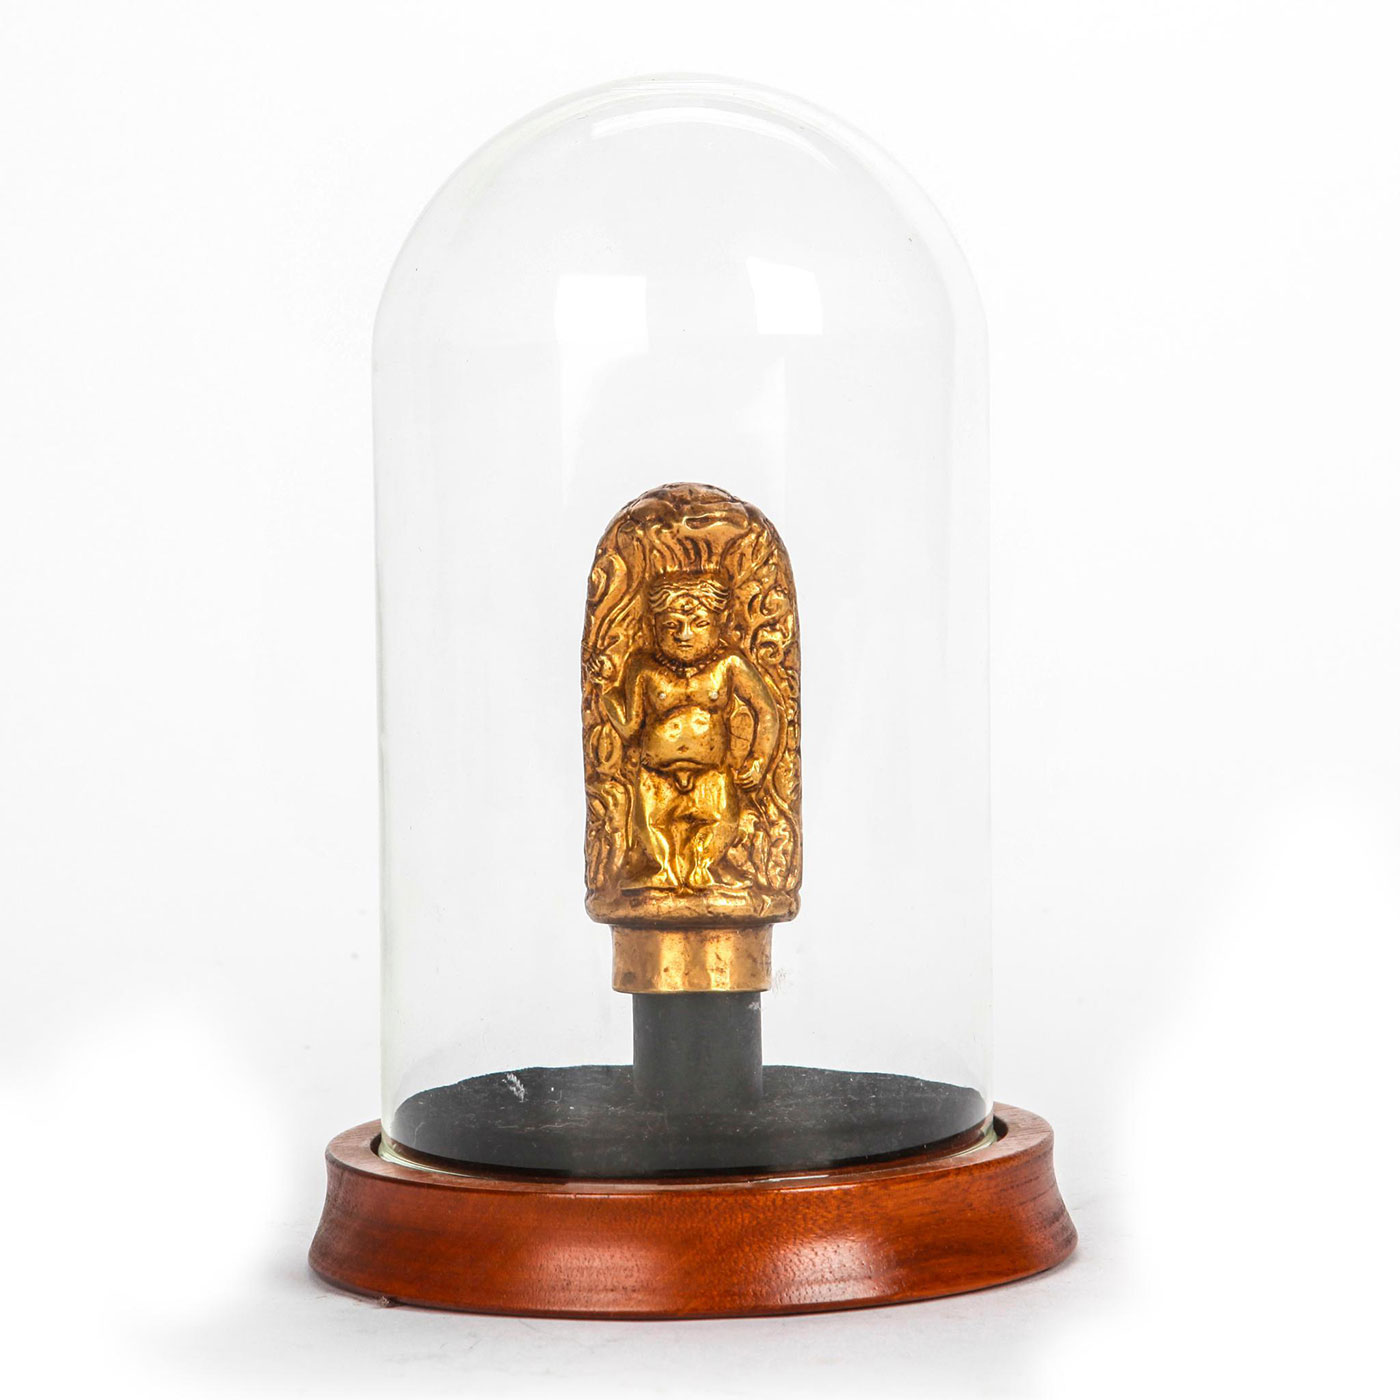 INDIAN GANESHA AND KUBERA ORNAMENTAL COVER IN CASE